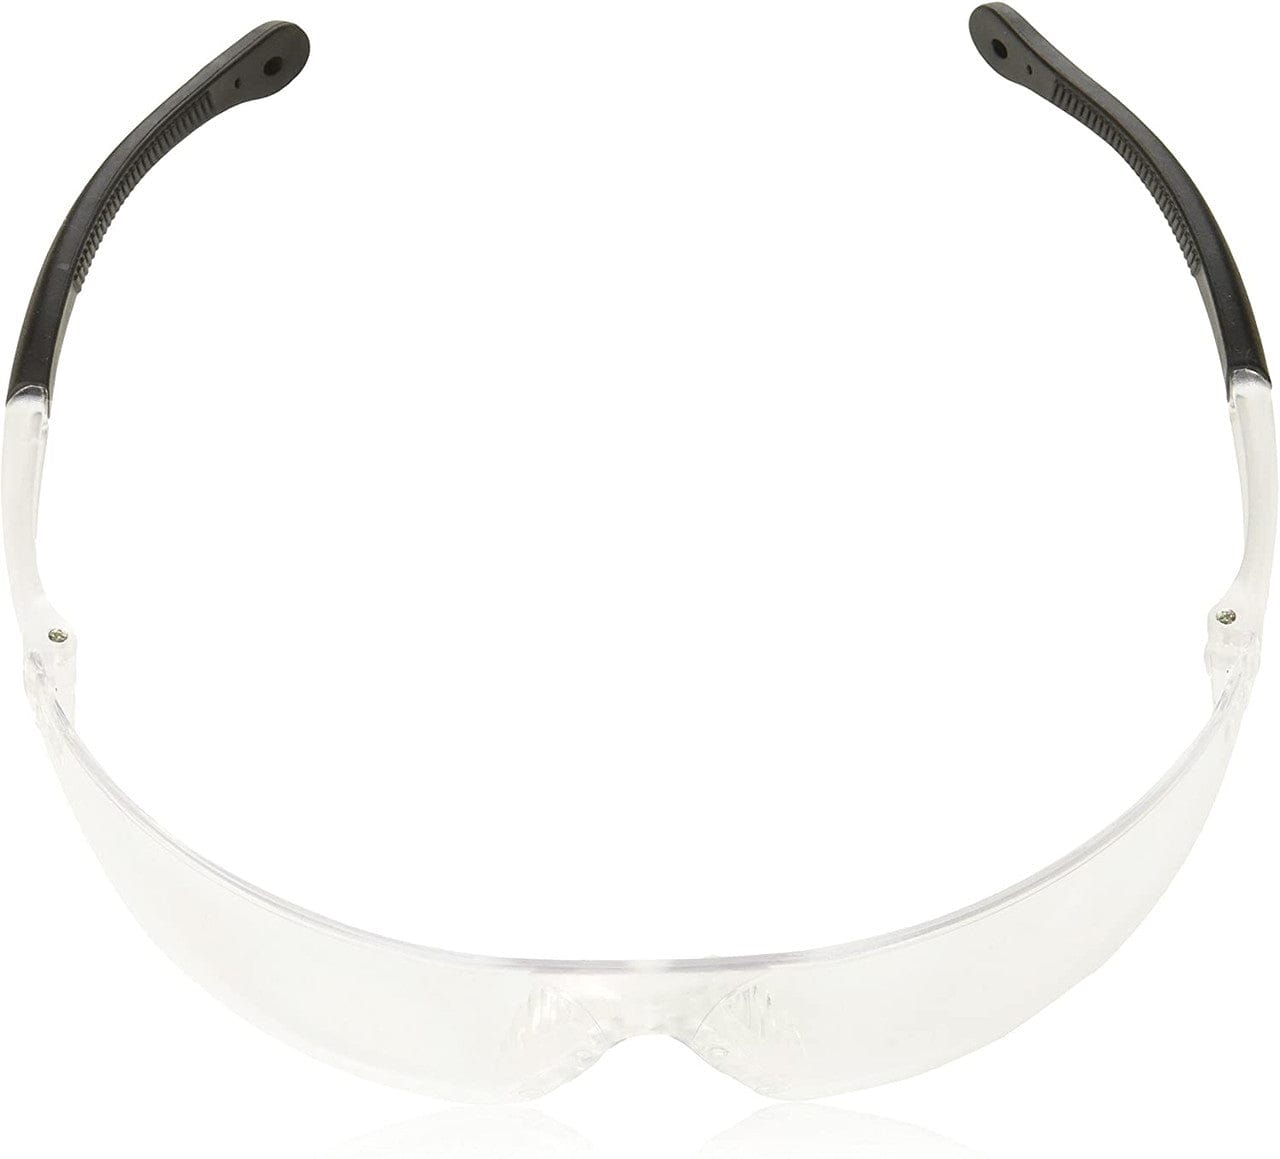 Radians Rad-Sequel Safety Glasses with Clear Anti-Fog Lens RS1-11 Top